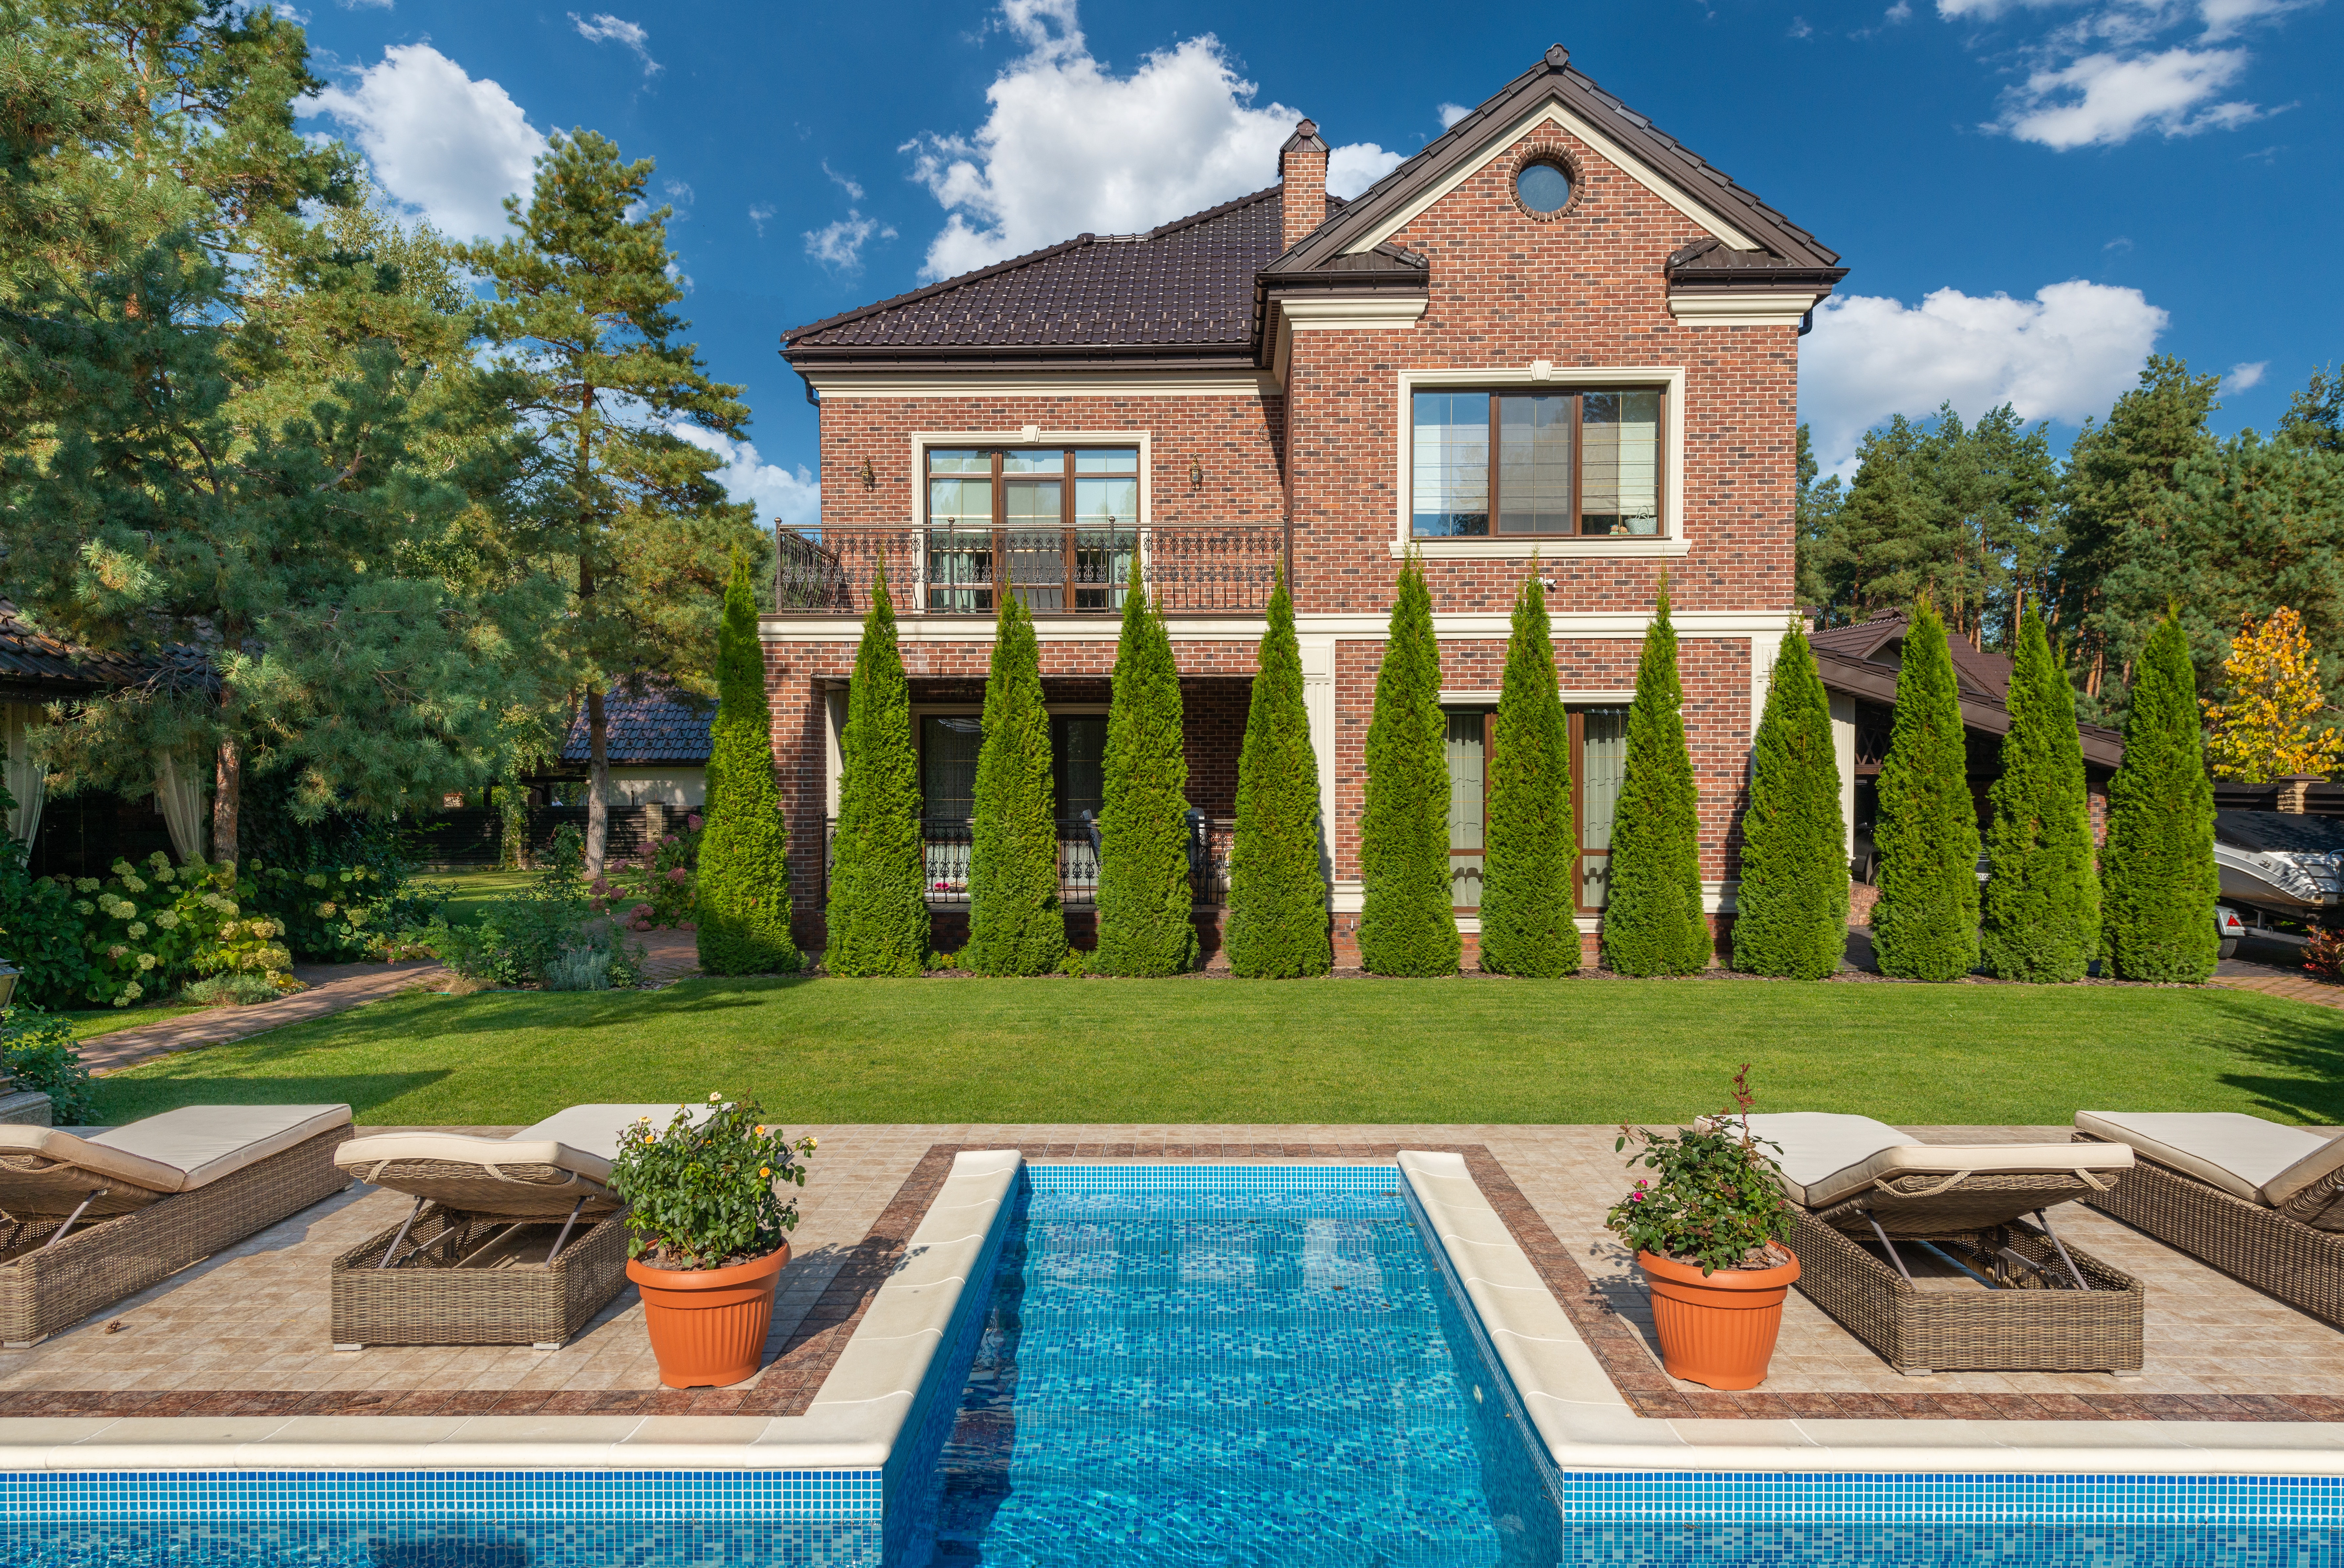 Selling a House with a Pool? Do These 3 Things First